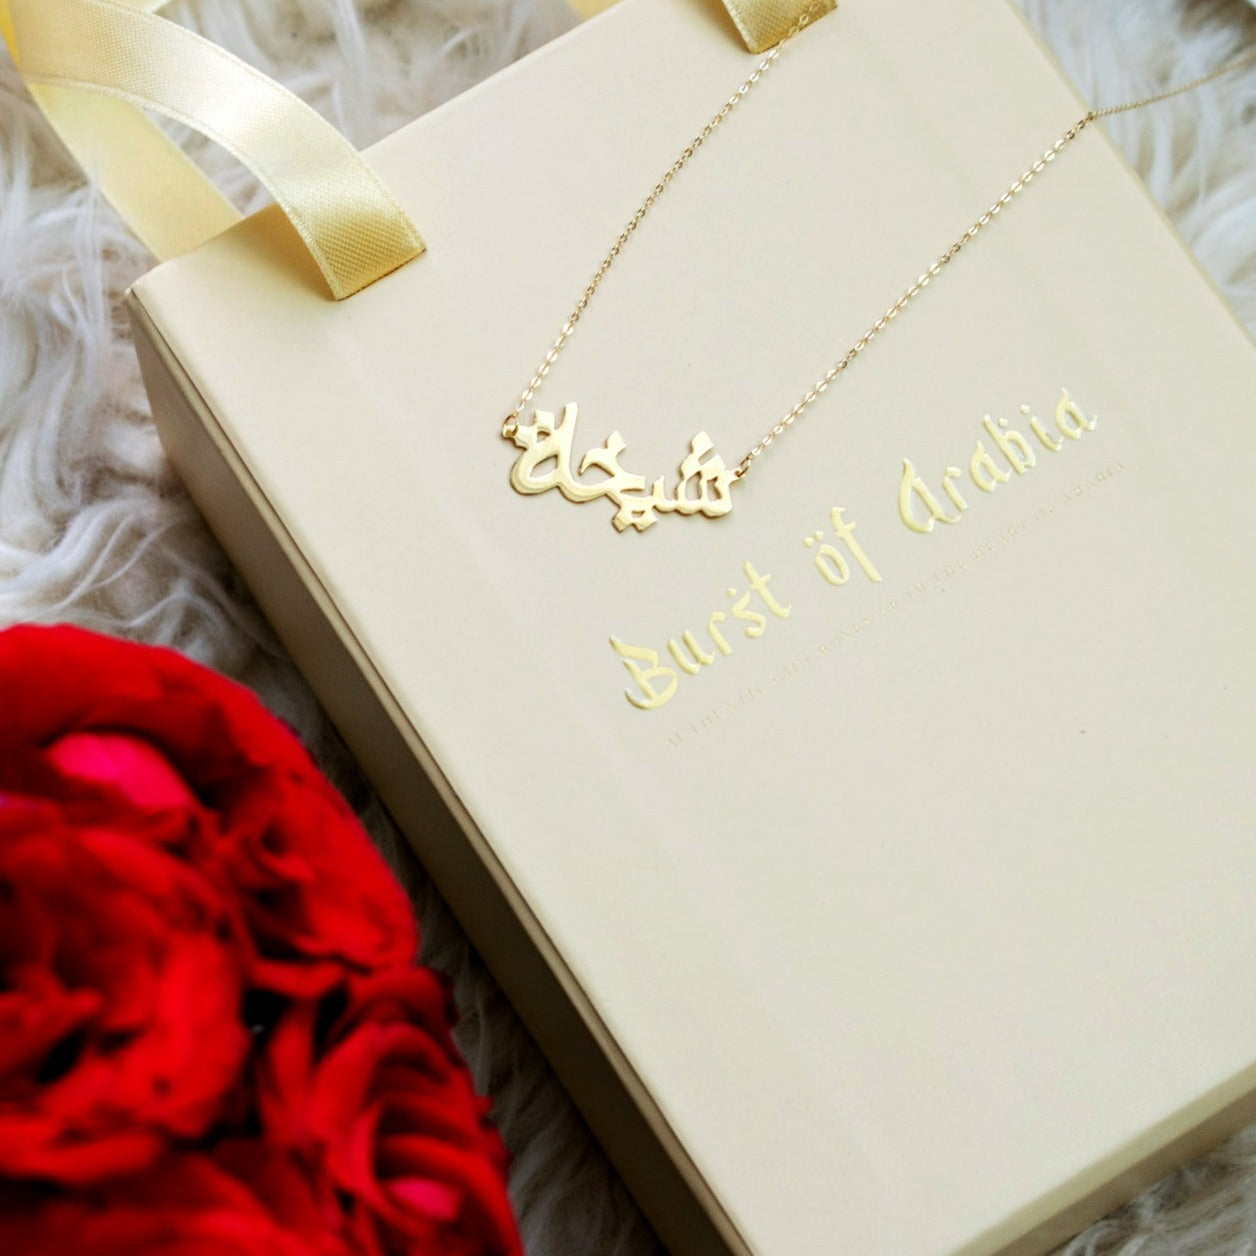 Multiple name custom chain made in real gold. Designed and handcrafted in the UAE. This authentic pendant is locally handcrafted with the highest quality materials and artisans available in Dubai.